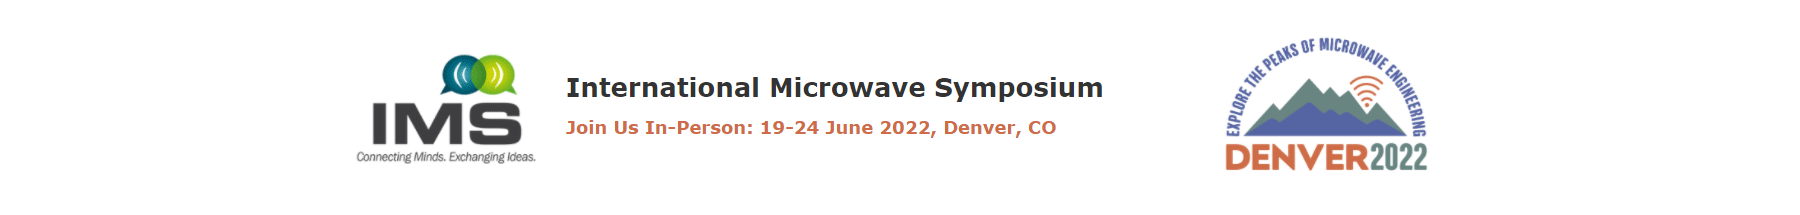 Logus Microwave Trade Shows and Events 2022 - Satellite Show - IMS Show - NAB Show